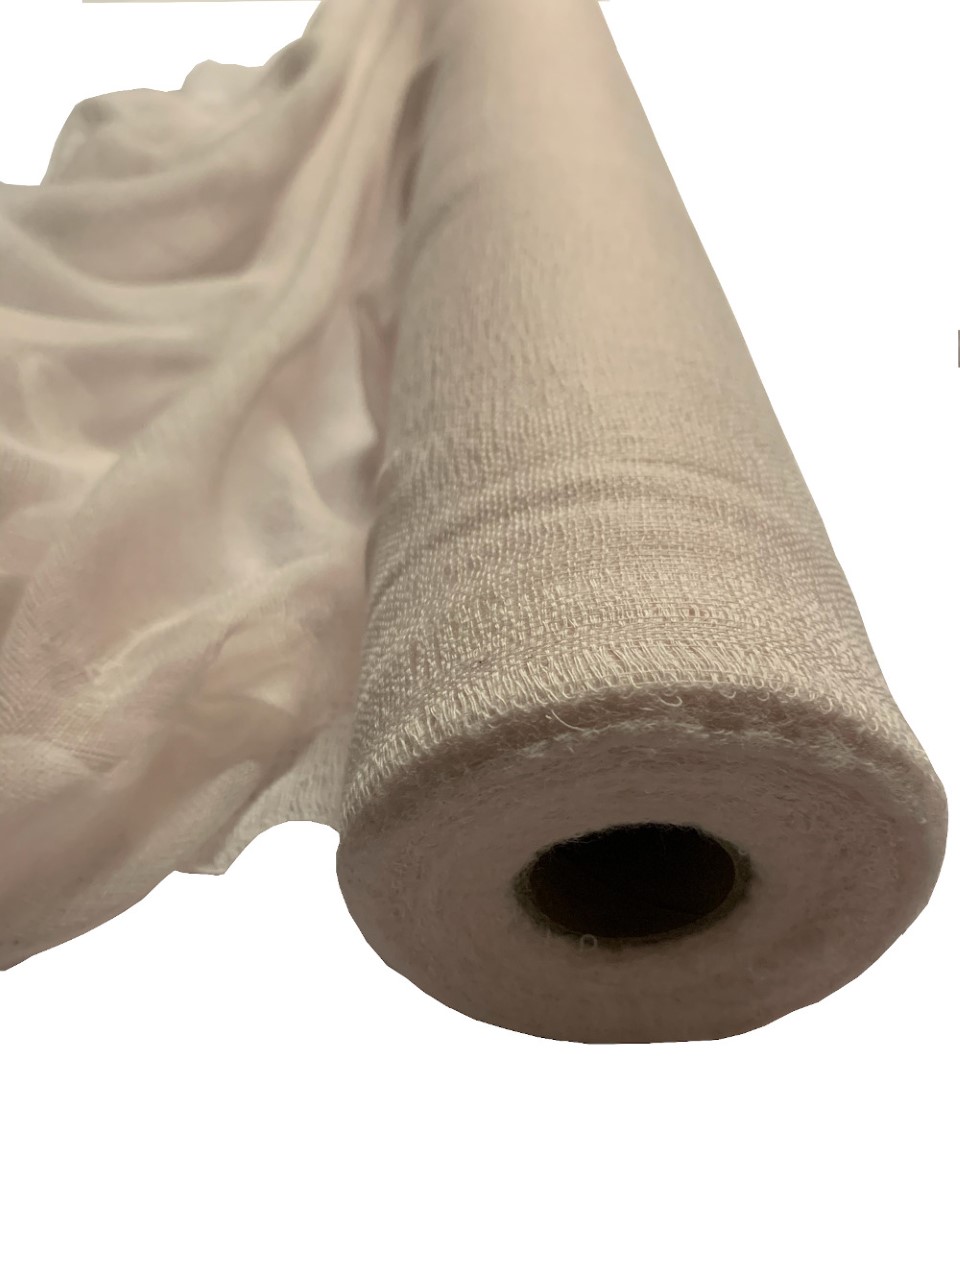 36" Baby Pink Cheesecloth 100 Foot Roll - 100% Cotton